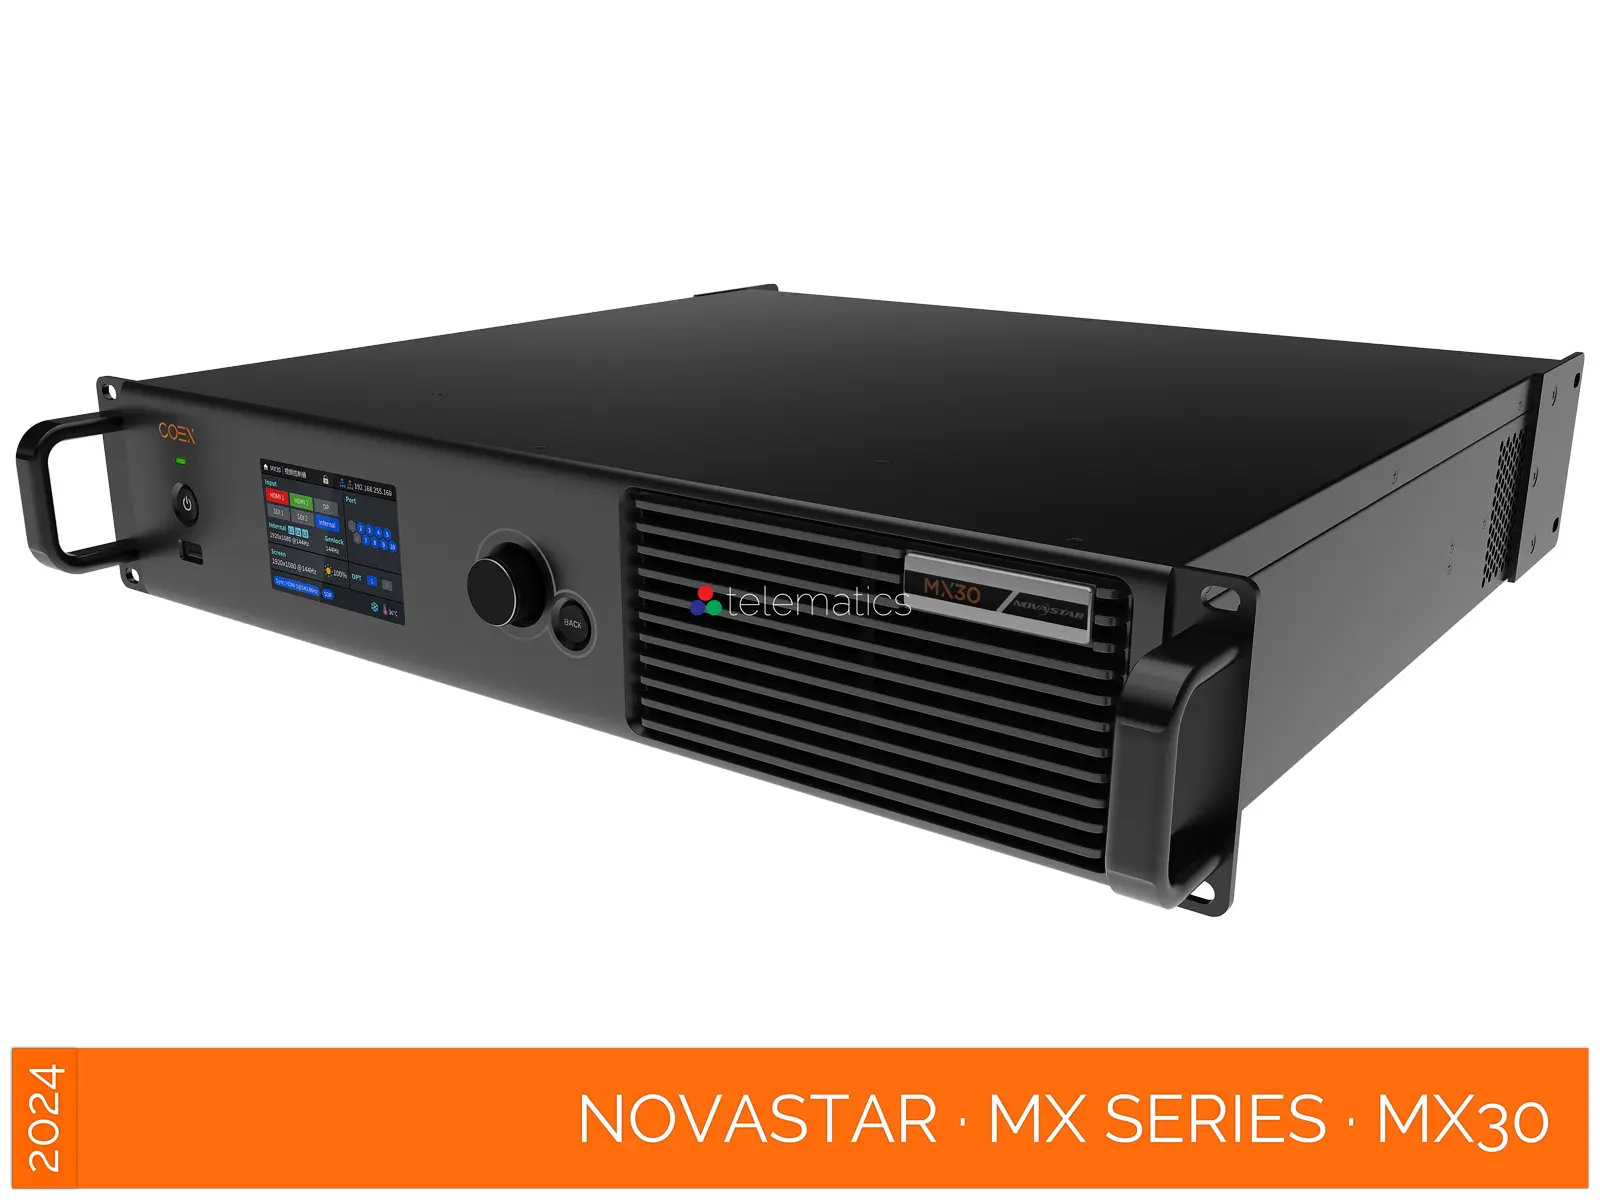 NovaStar COEX · All In One Controller · MX Series · MX30 · 6,597,220 pixels · Vision Management Platform · Viplex · review · price · cost · priced from $ 2,175 per unit